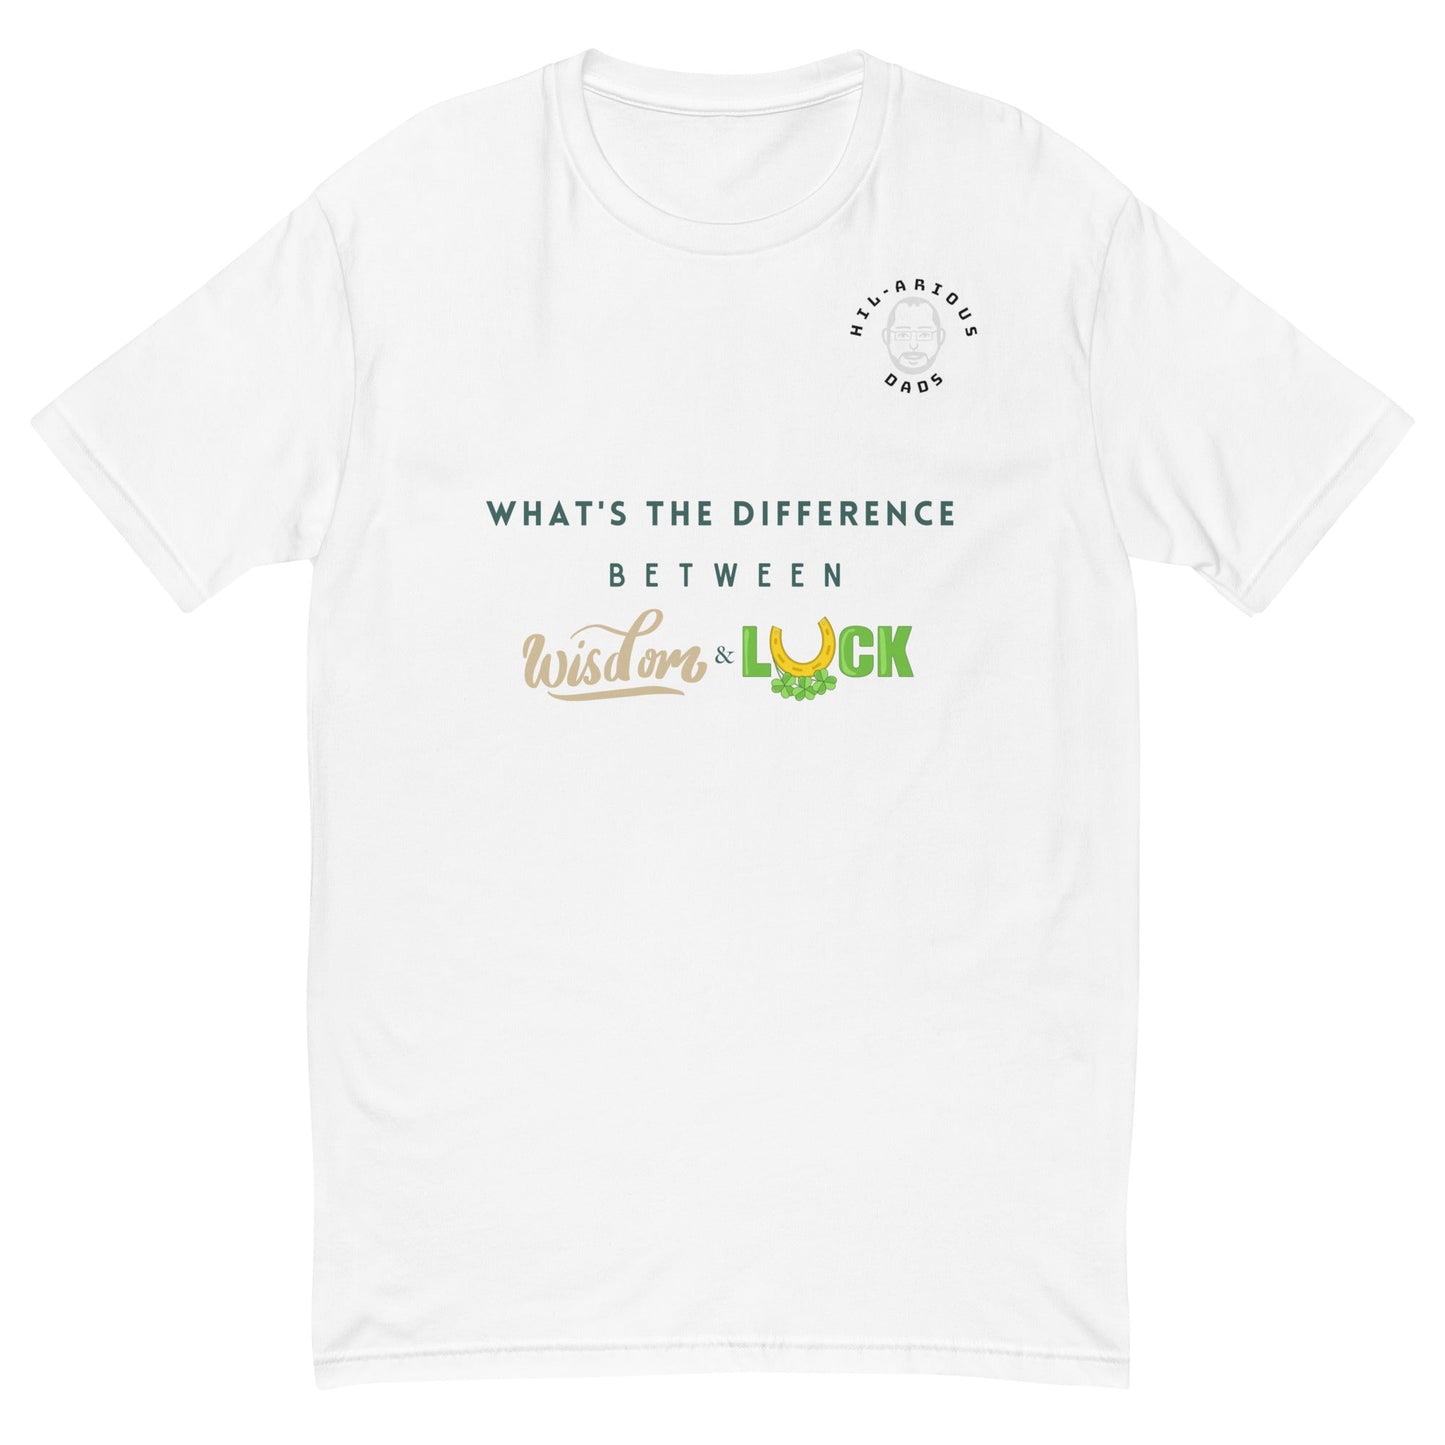 What's the difference between wisdom and luck?-T-shirt - Hil-arious Dads